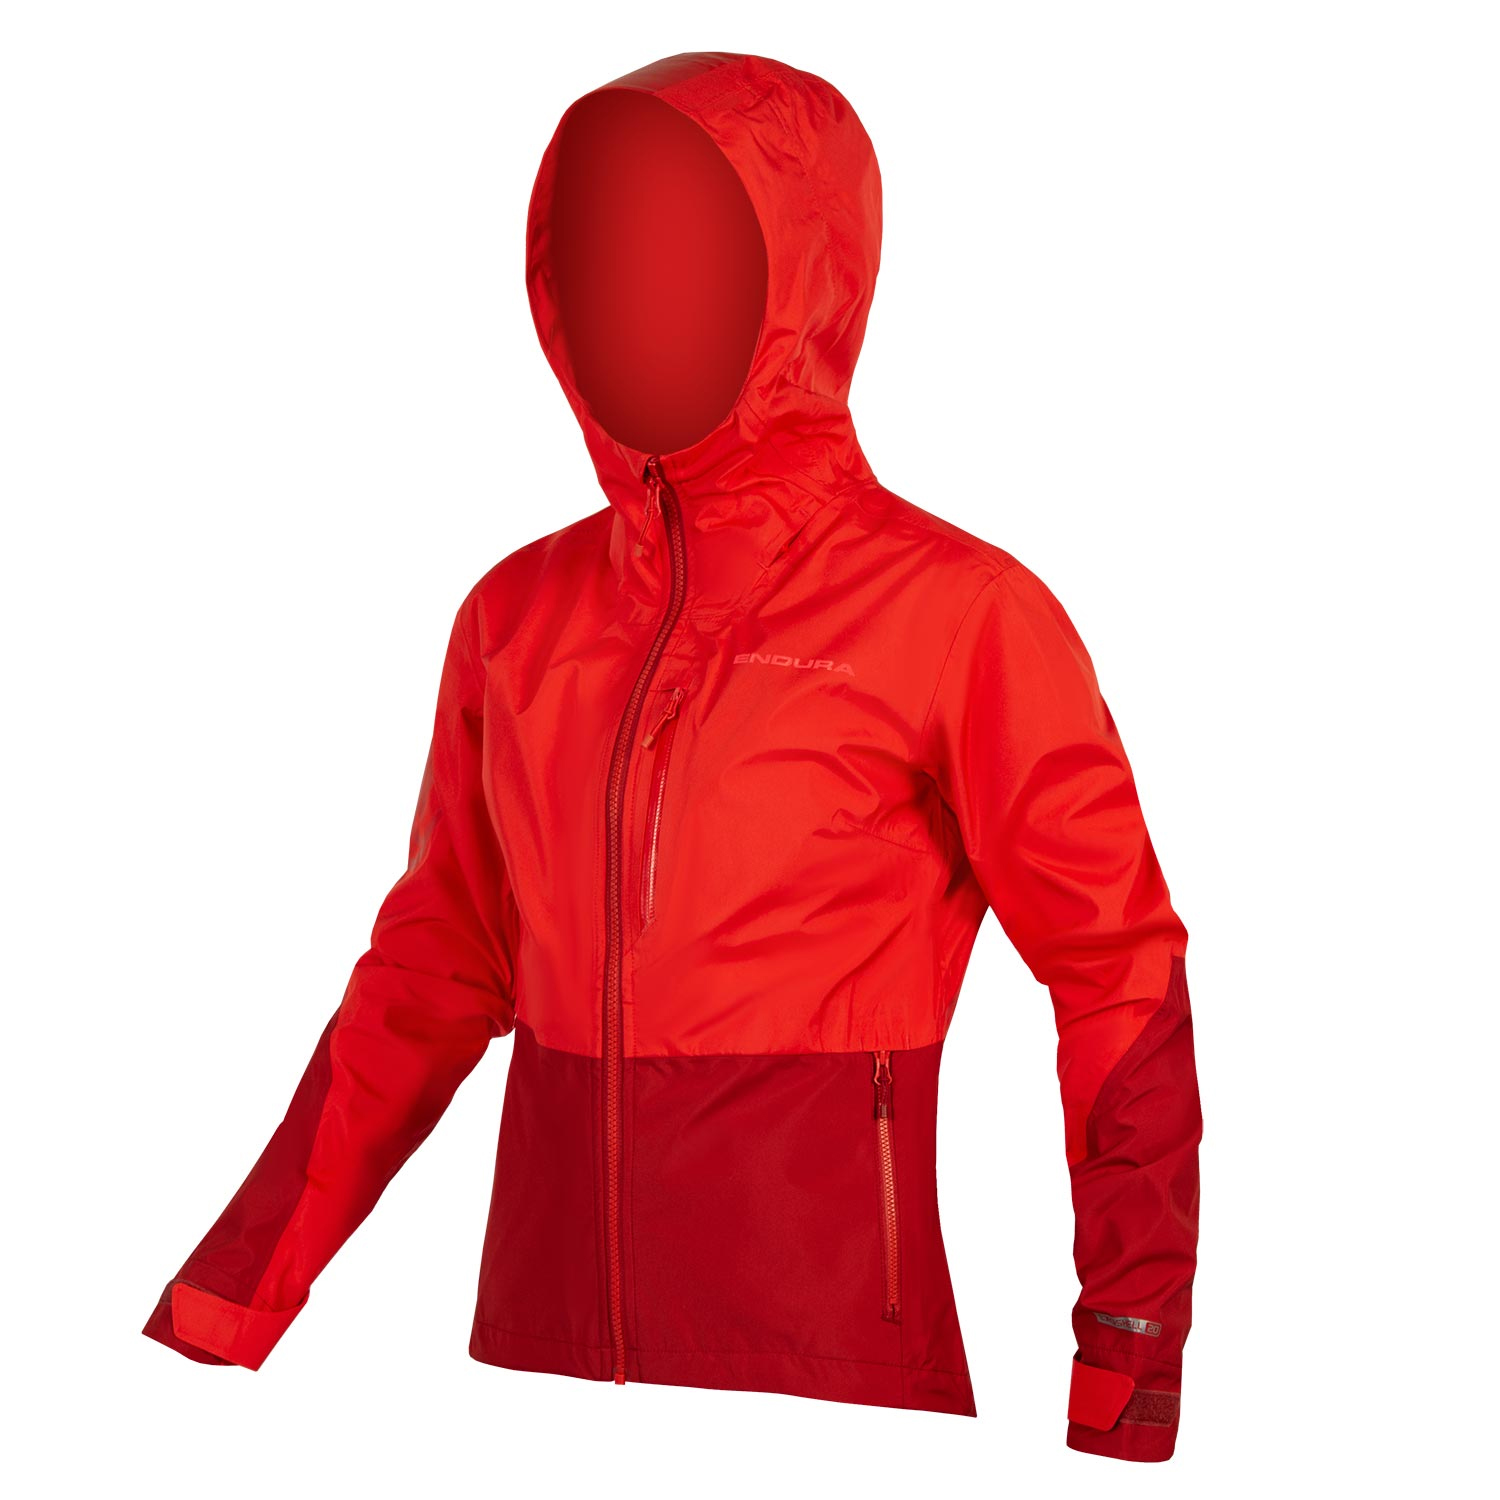 'Dash' Windproof CYCLING JACKET/Vest with Removable Sleeves in Red Made by GSG 